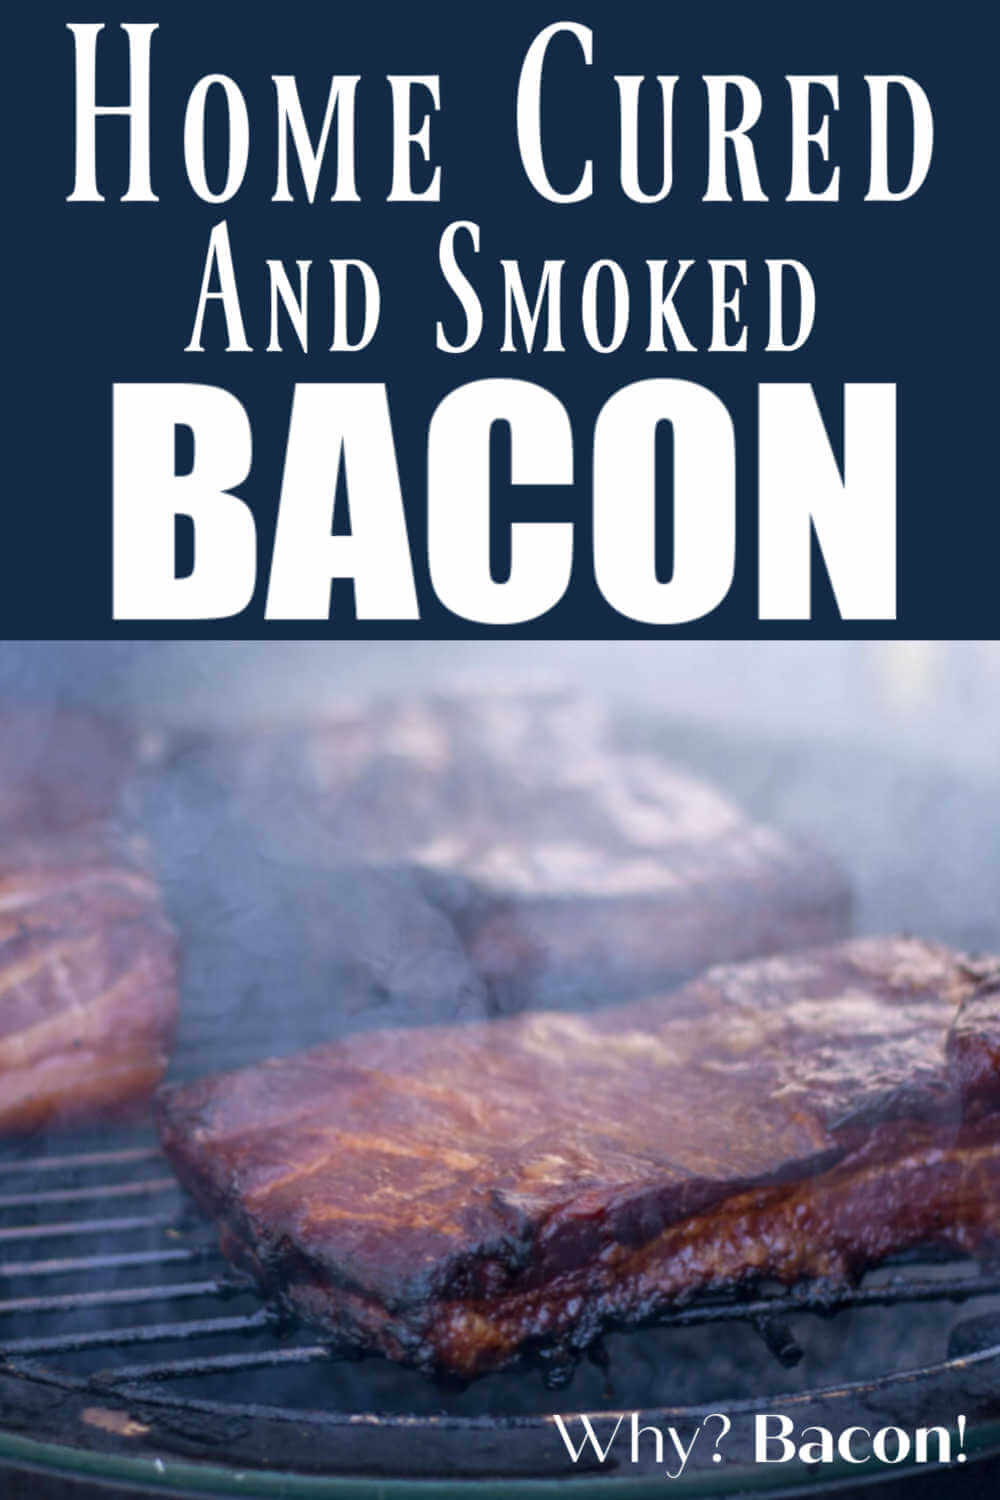 How to Home Cure and Smoke Bacon